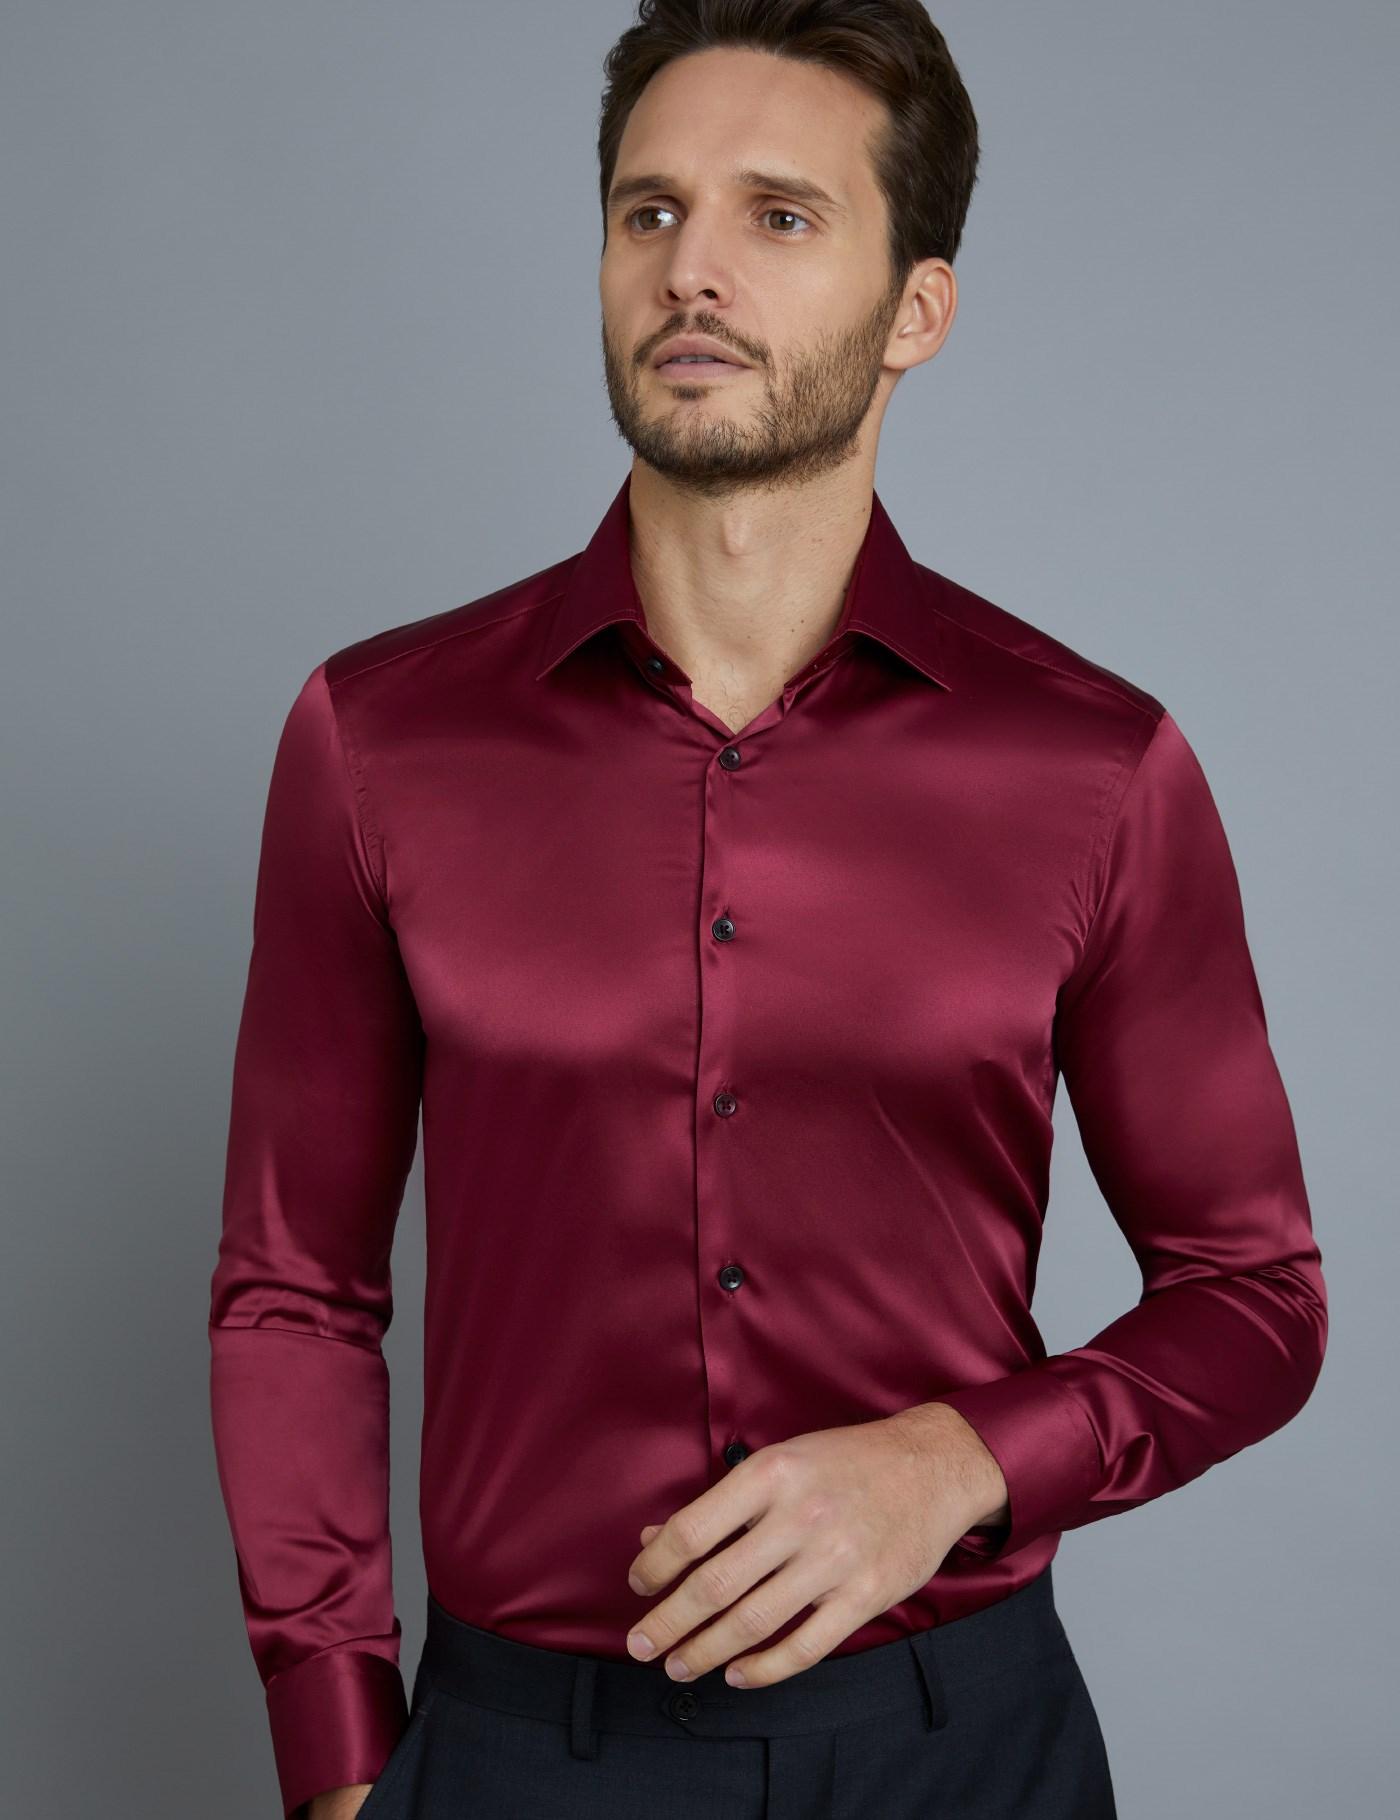 Hawes & Curtis Burgundy Satin Slim Fit Stretch Shirt in Red for Men - Lyst